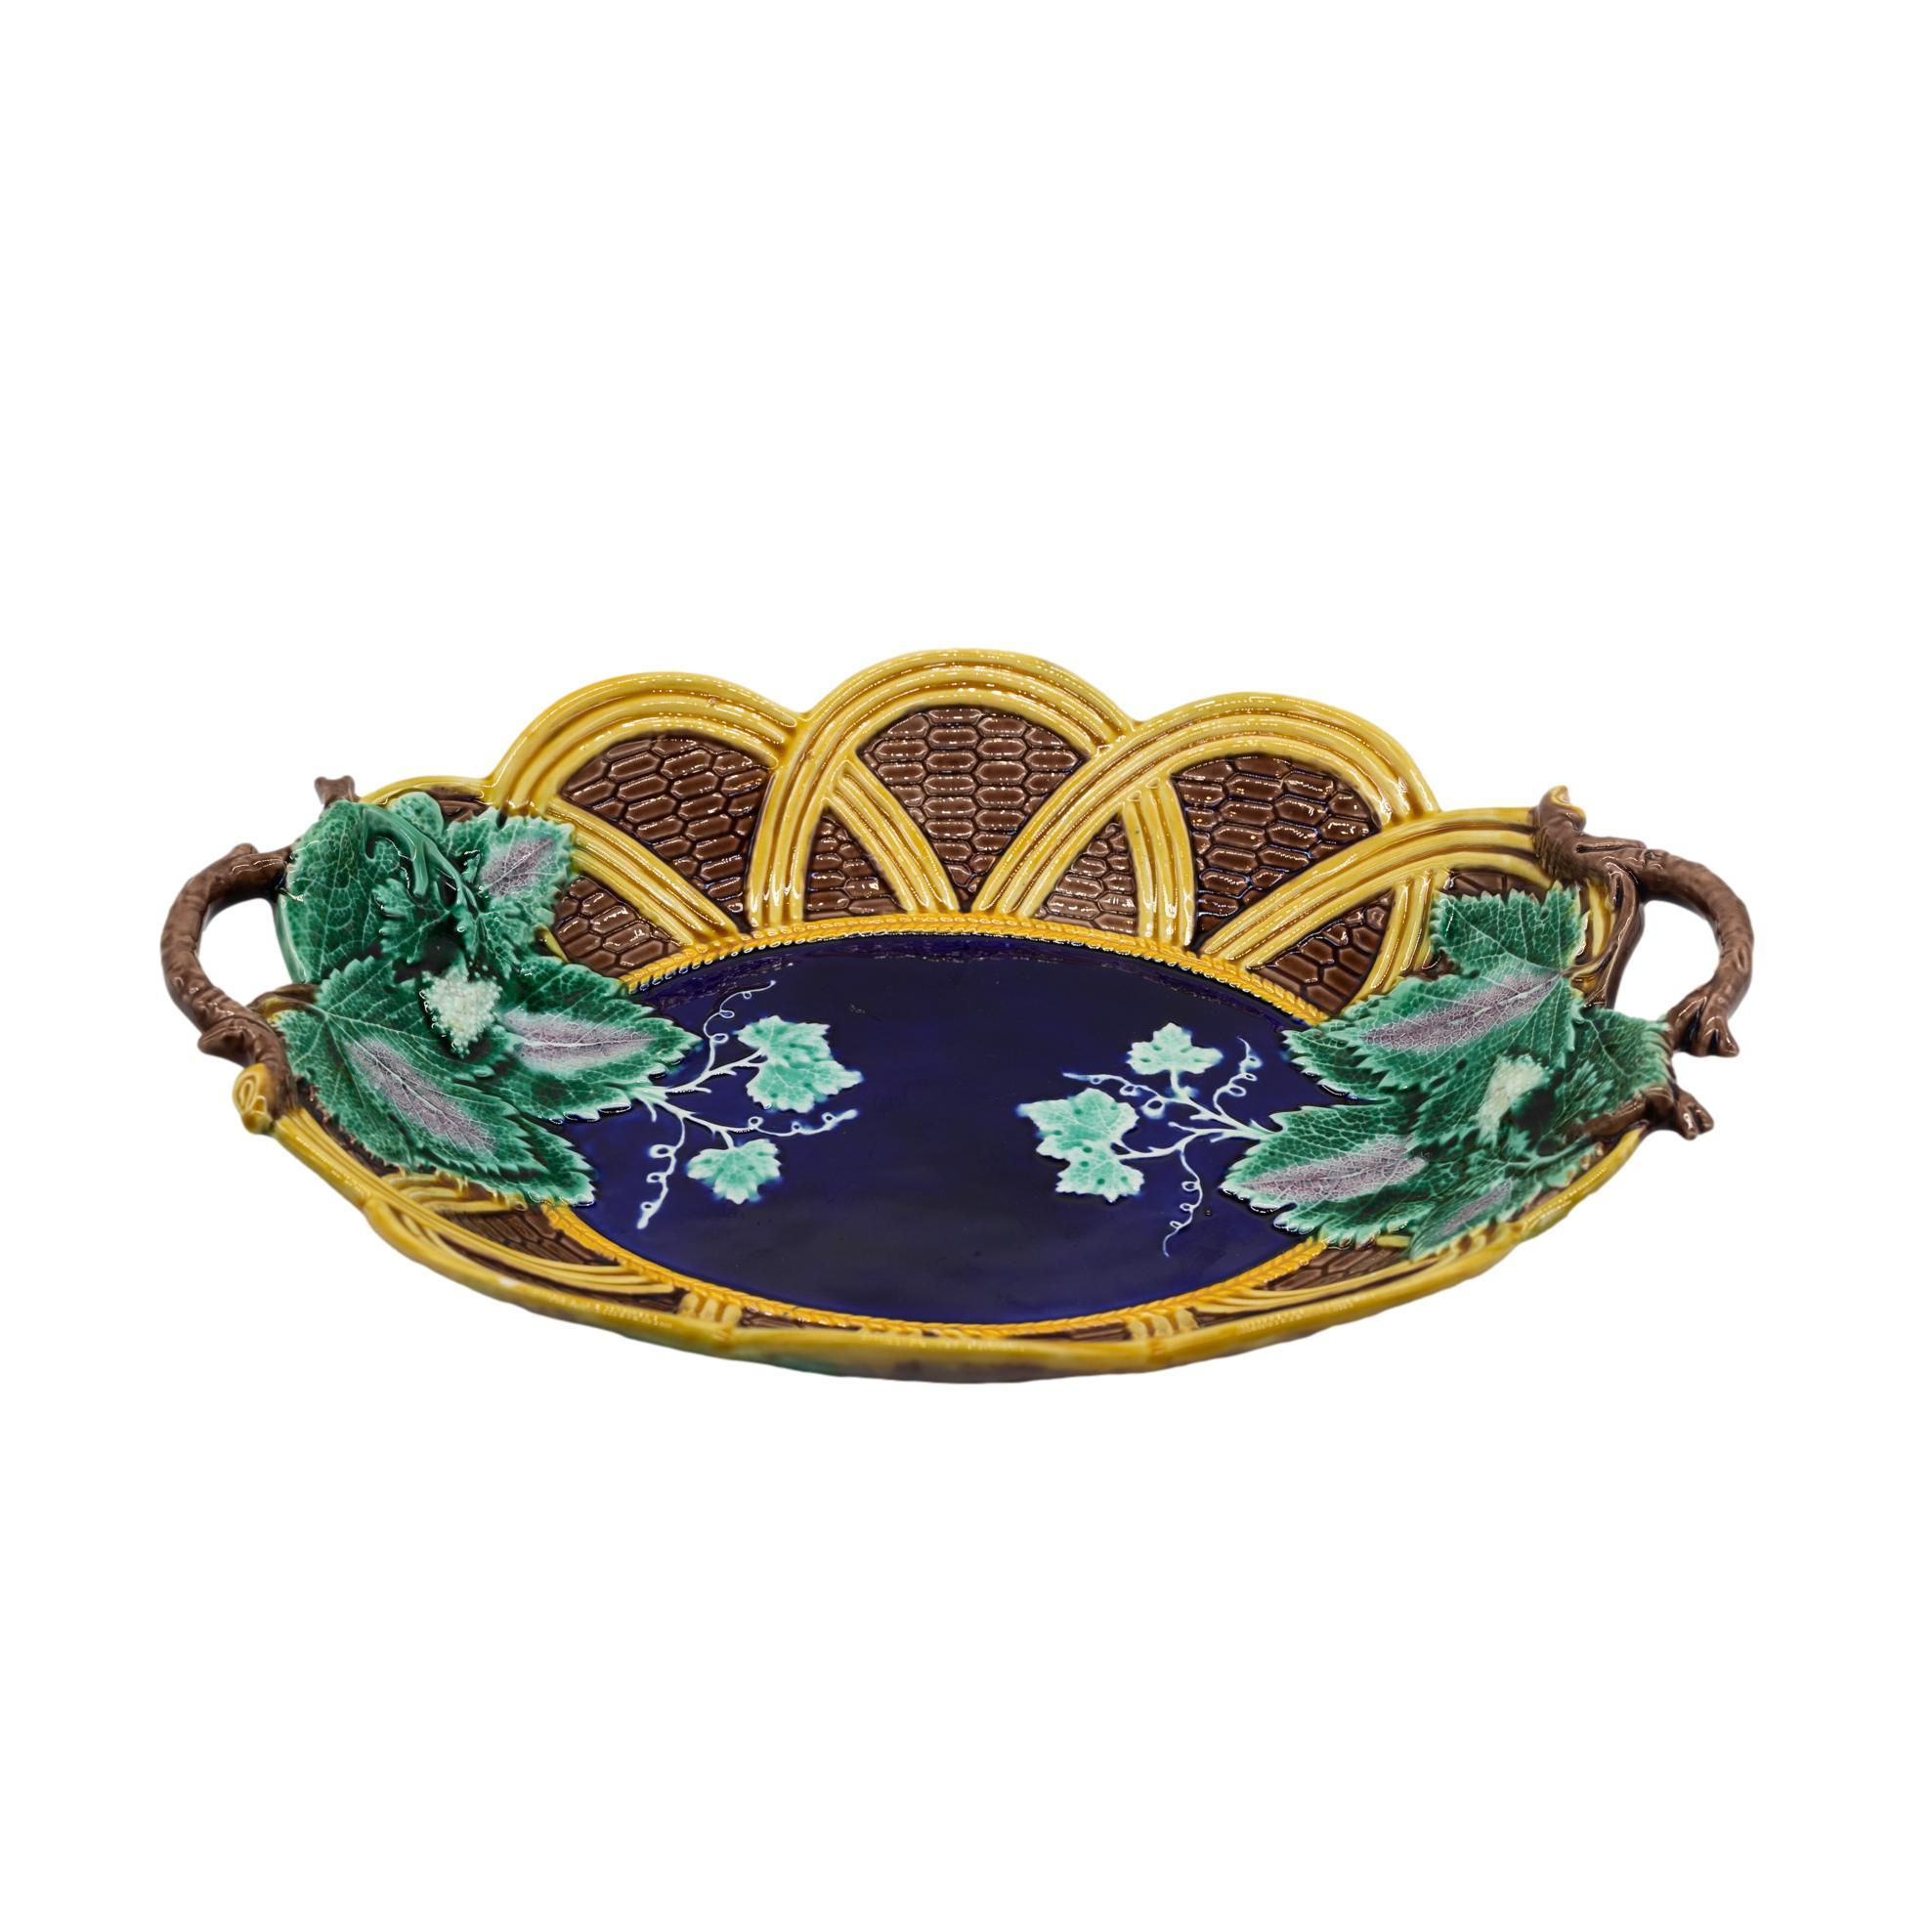 English Wedgwood Majolica Basketweave and Grape Bread Tray, Cobalt Center, Dated 1870 For Sale